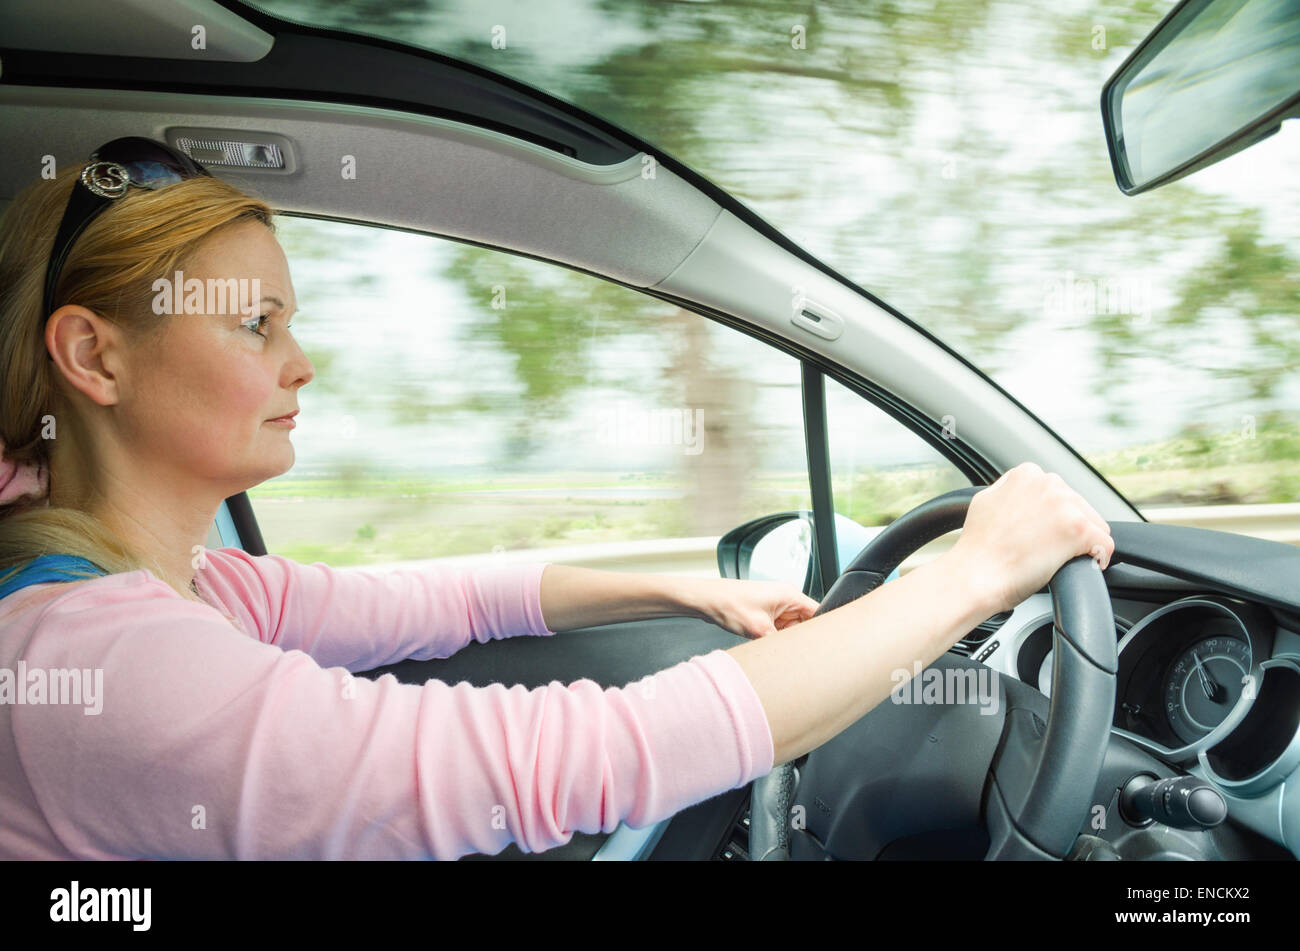 Profile portrait of serious calm woman careful and safe driving car on country road. Stock Photo